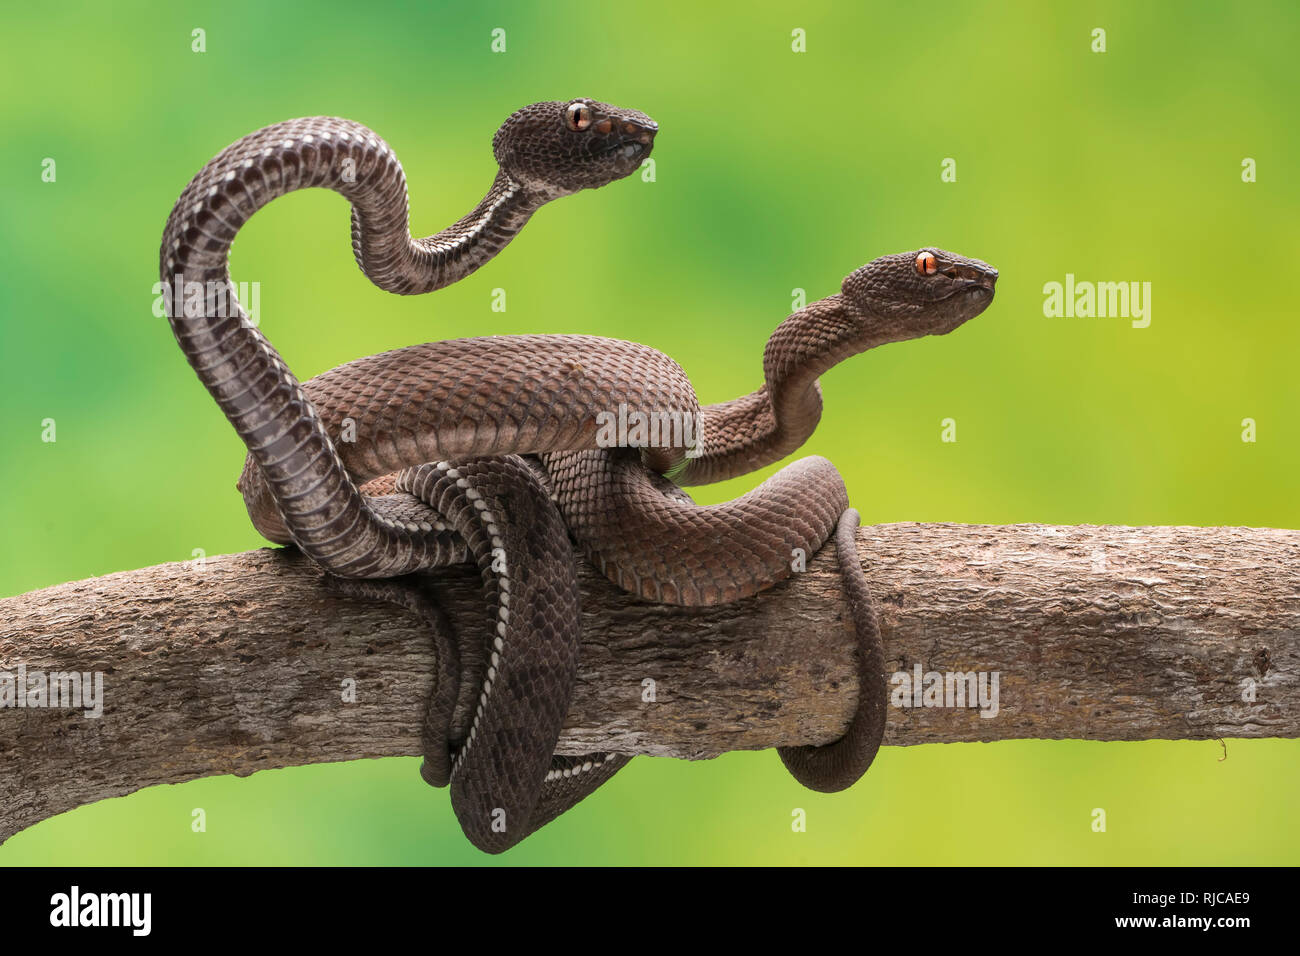 Two snakes intertwined on a branch, Indonesia Stock Photo